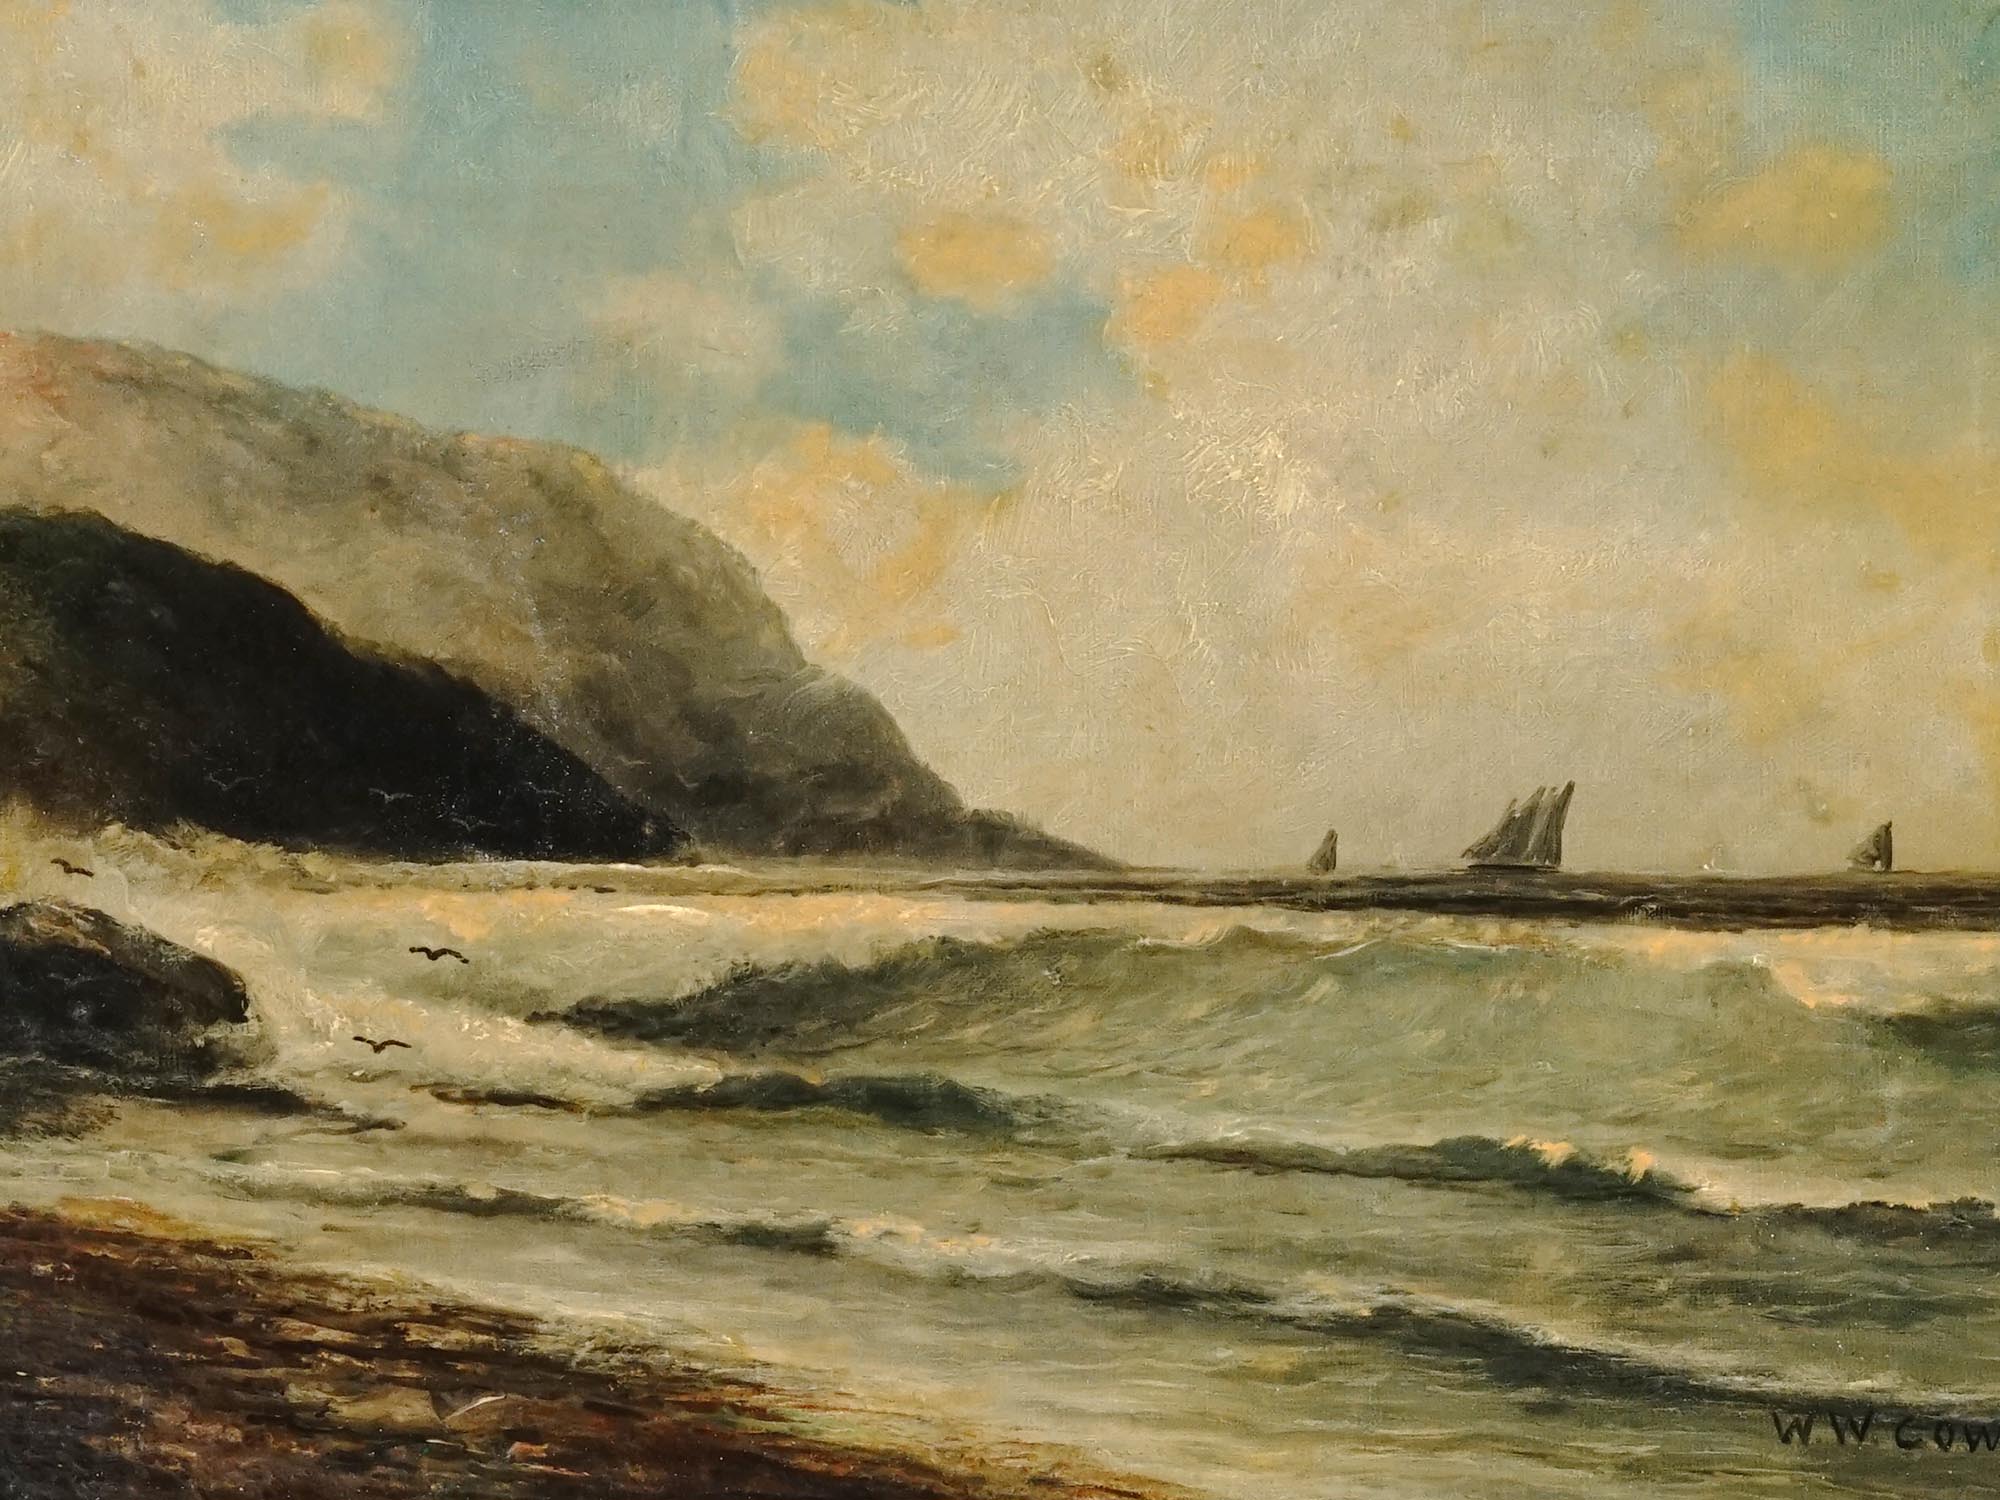 ANTIQUE MARINE PAINTING BY WILLIAM WILSON COWELL PIC-1